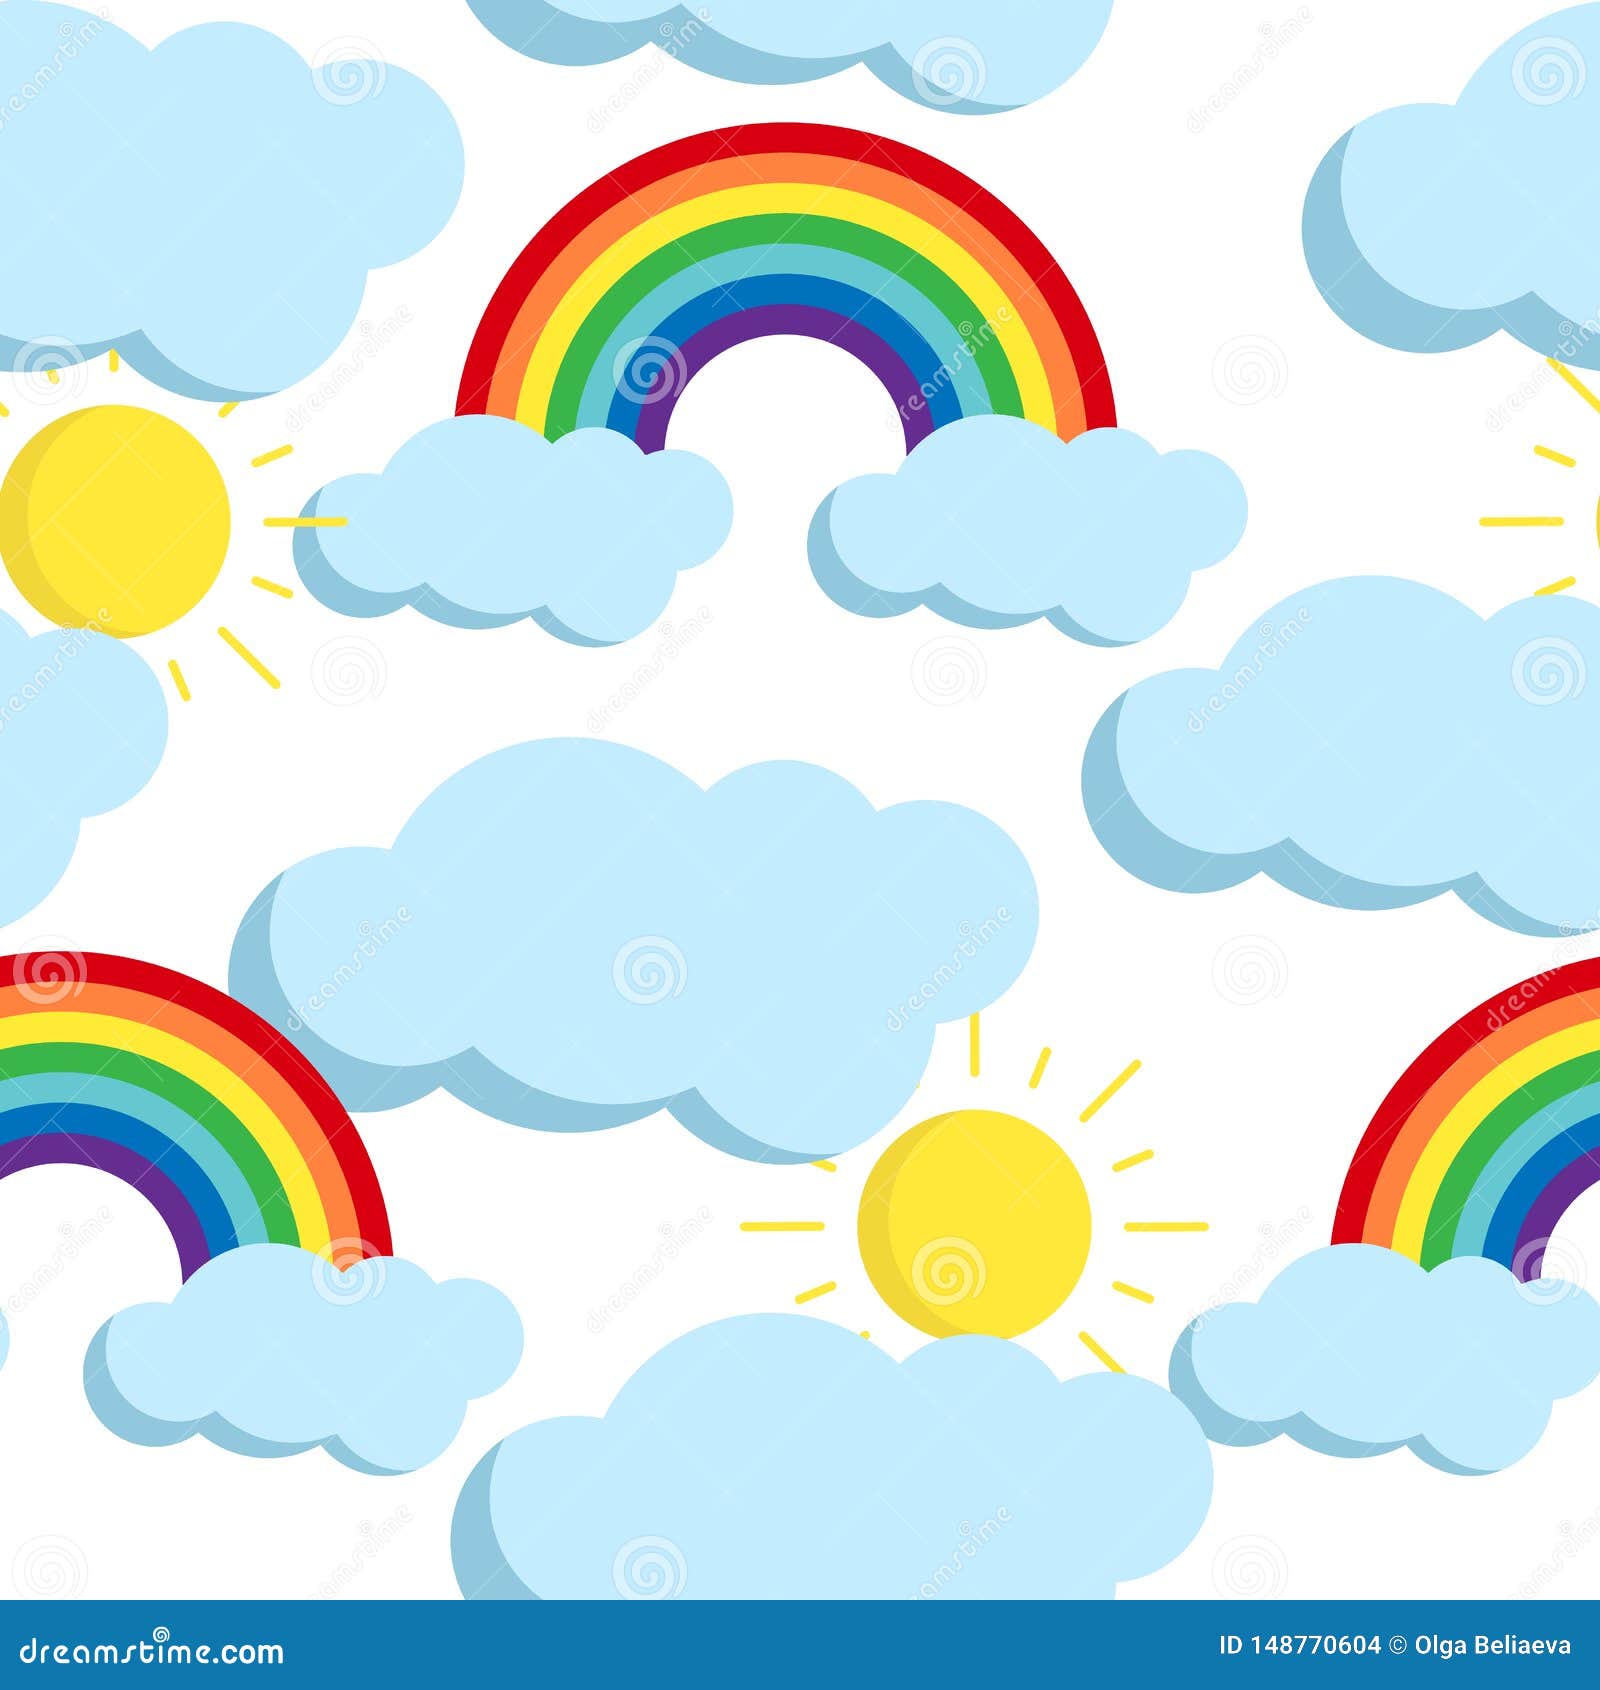 Cute Vector Seamless Pattern with Rainbows and Clouds Icons. Stock ...